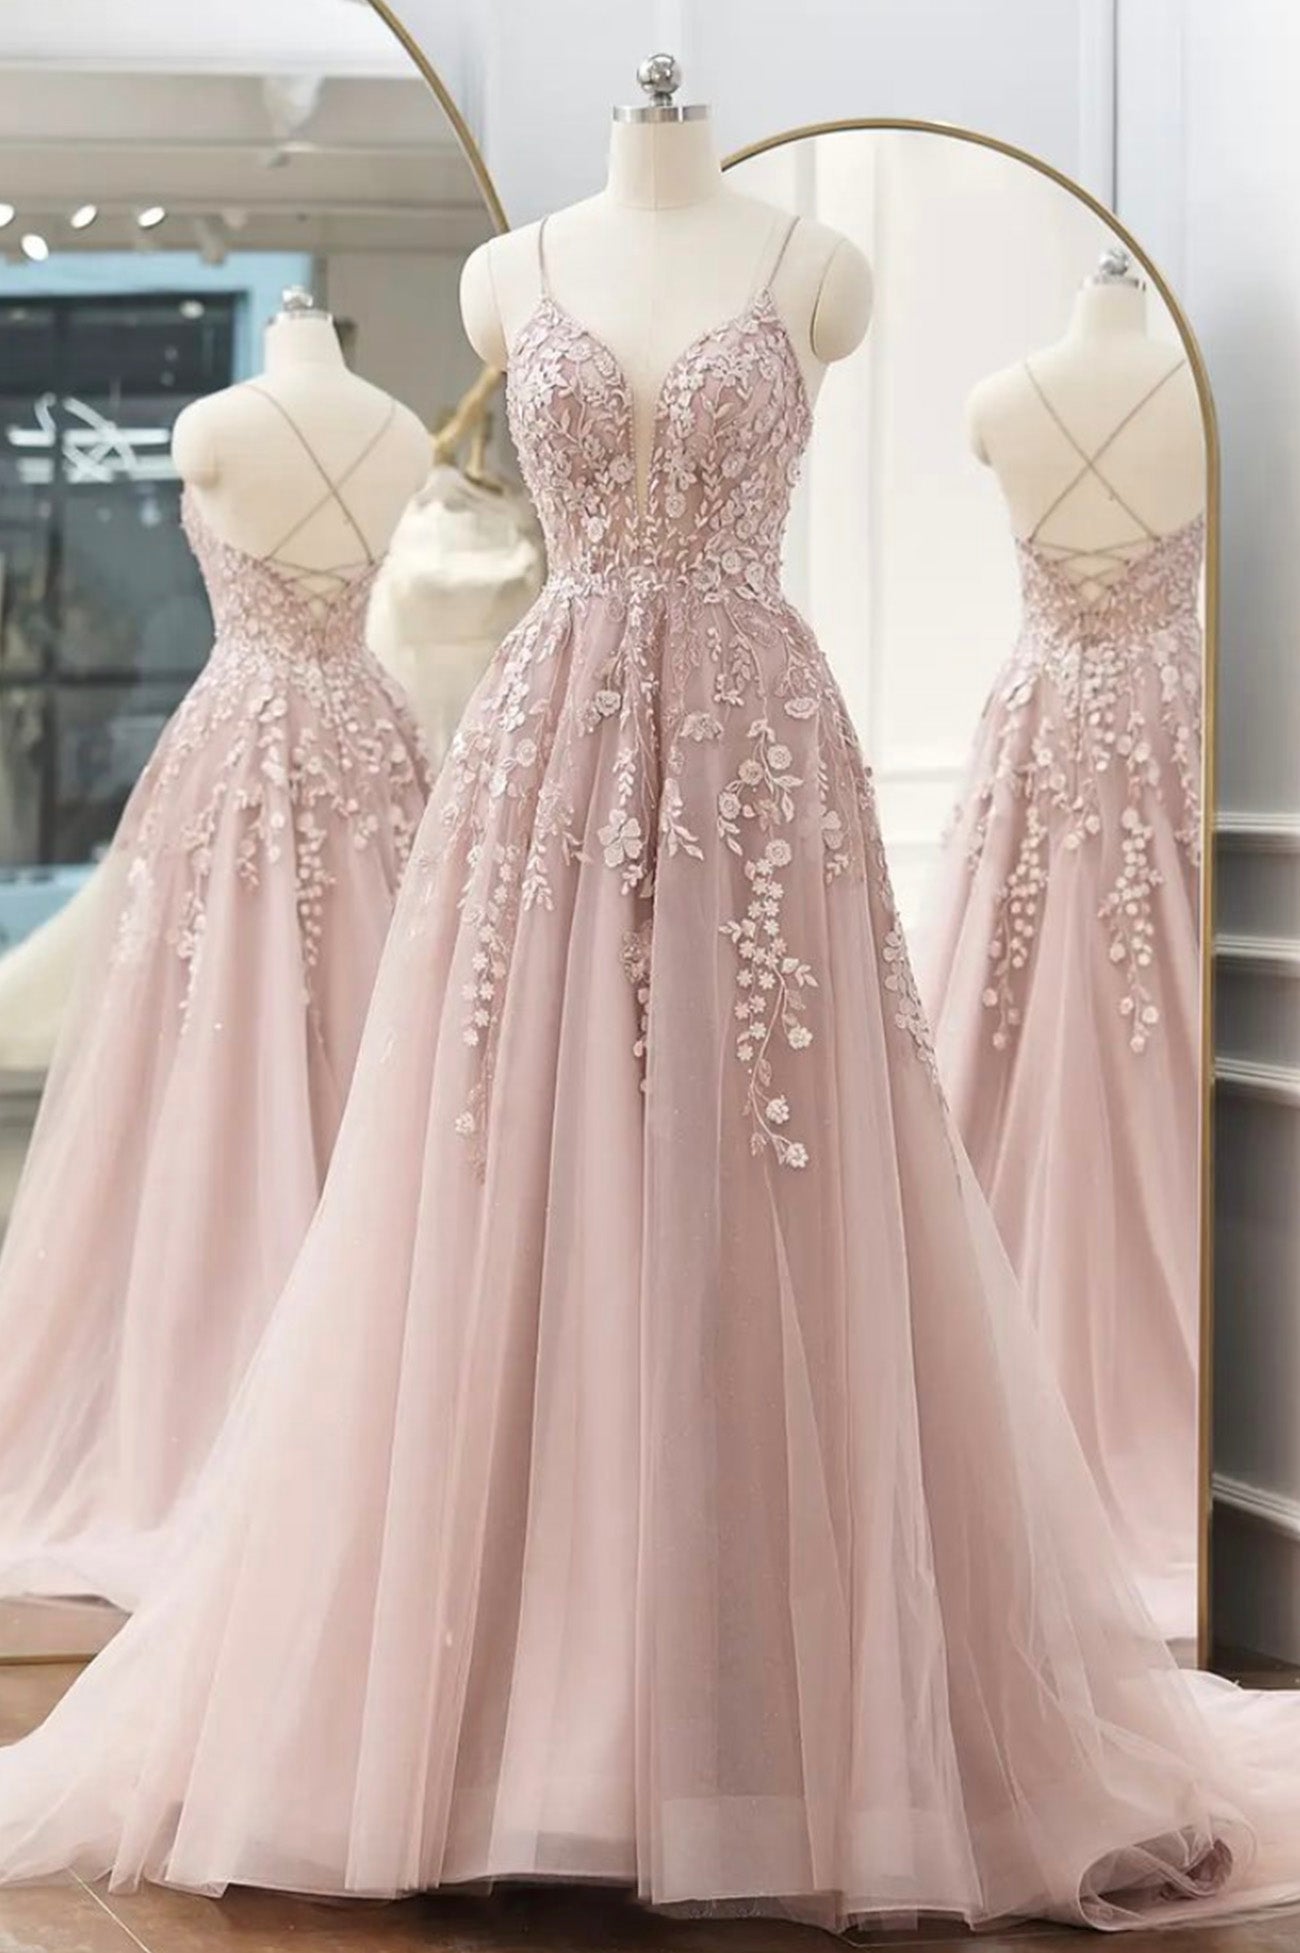 Pink Tulle Lace Long Prom Dresses, A-line Spaghetti Strap Evening Dresses